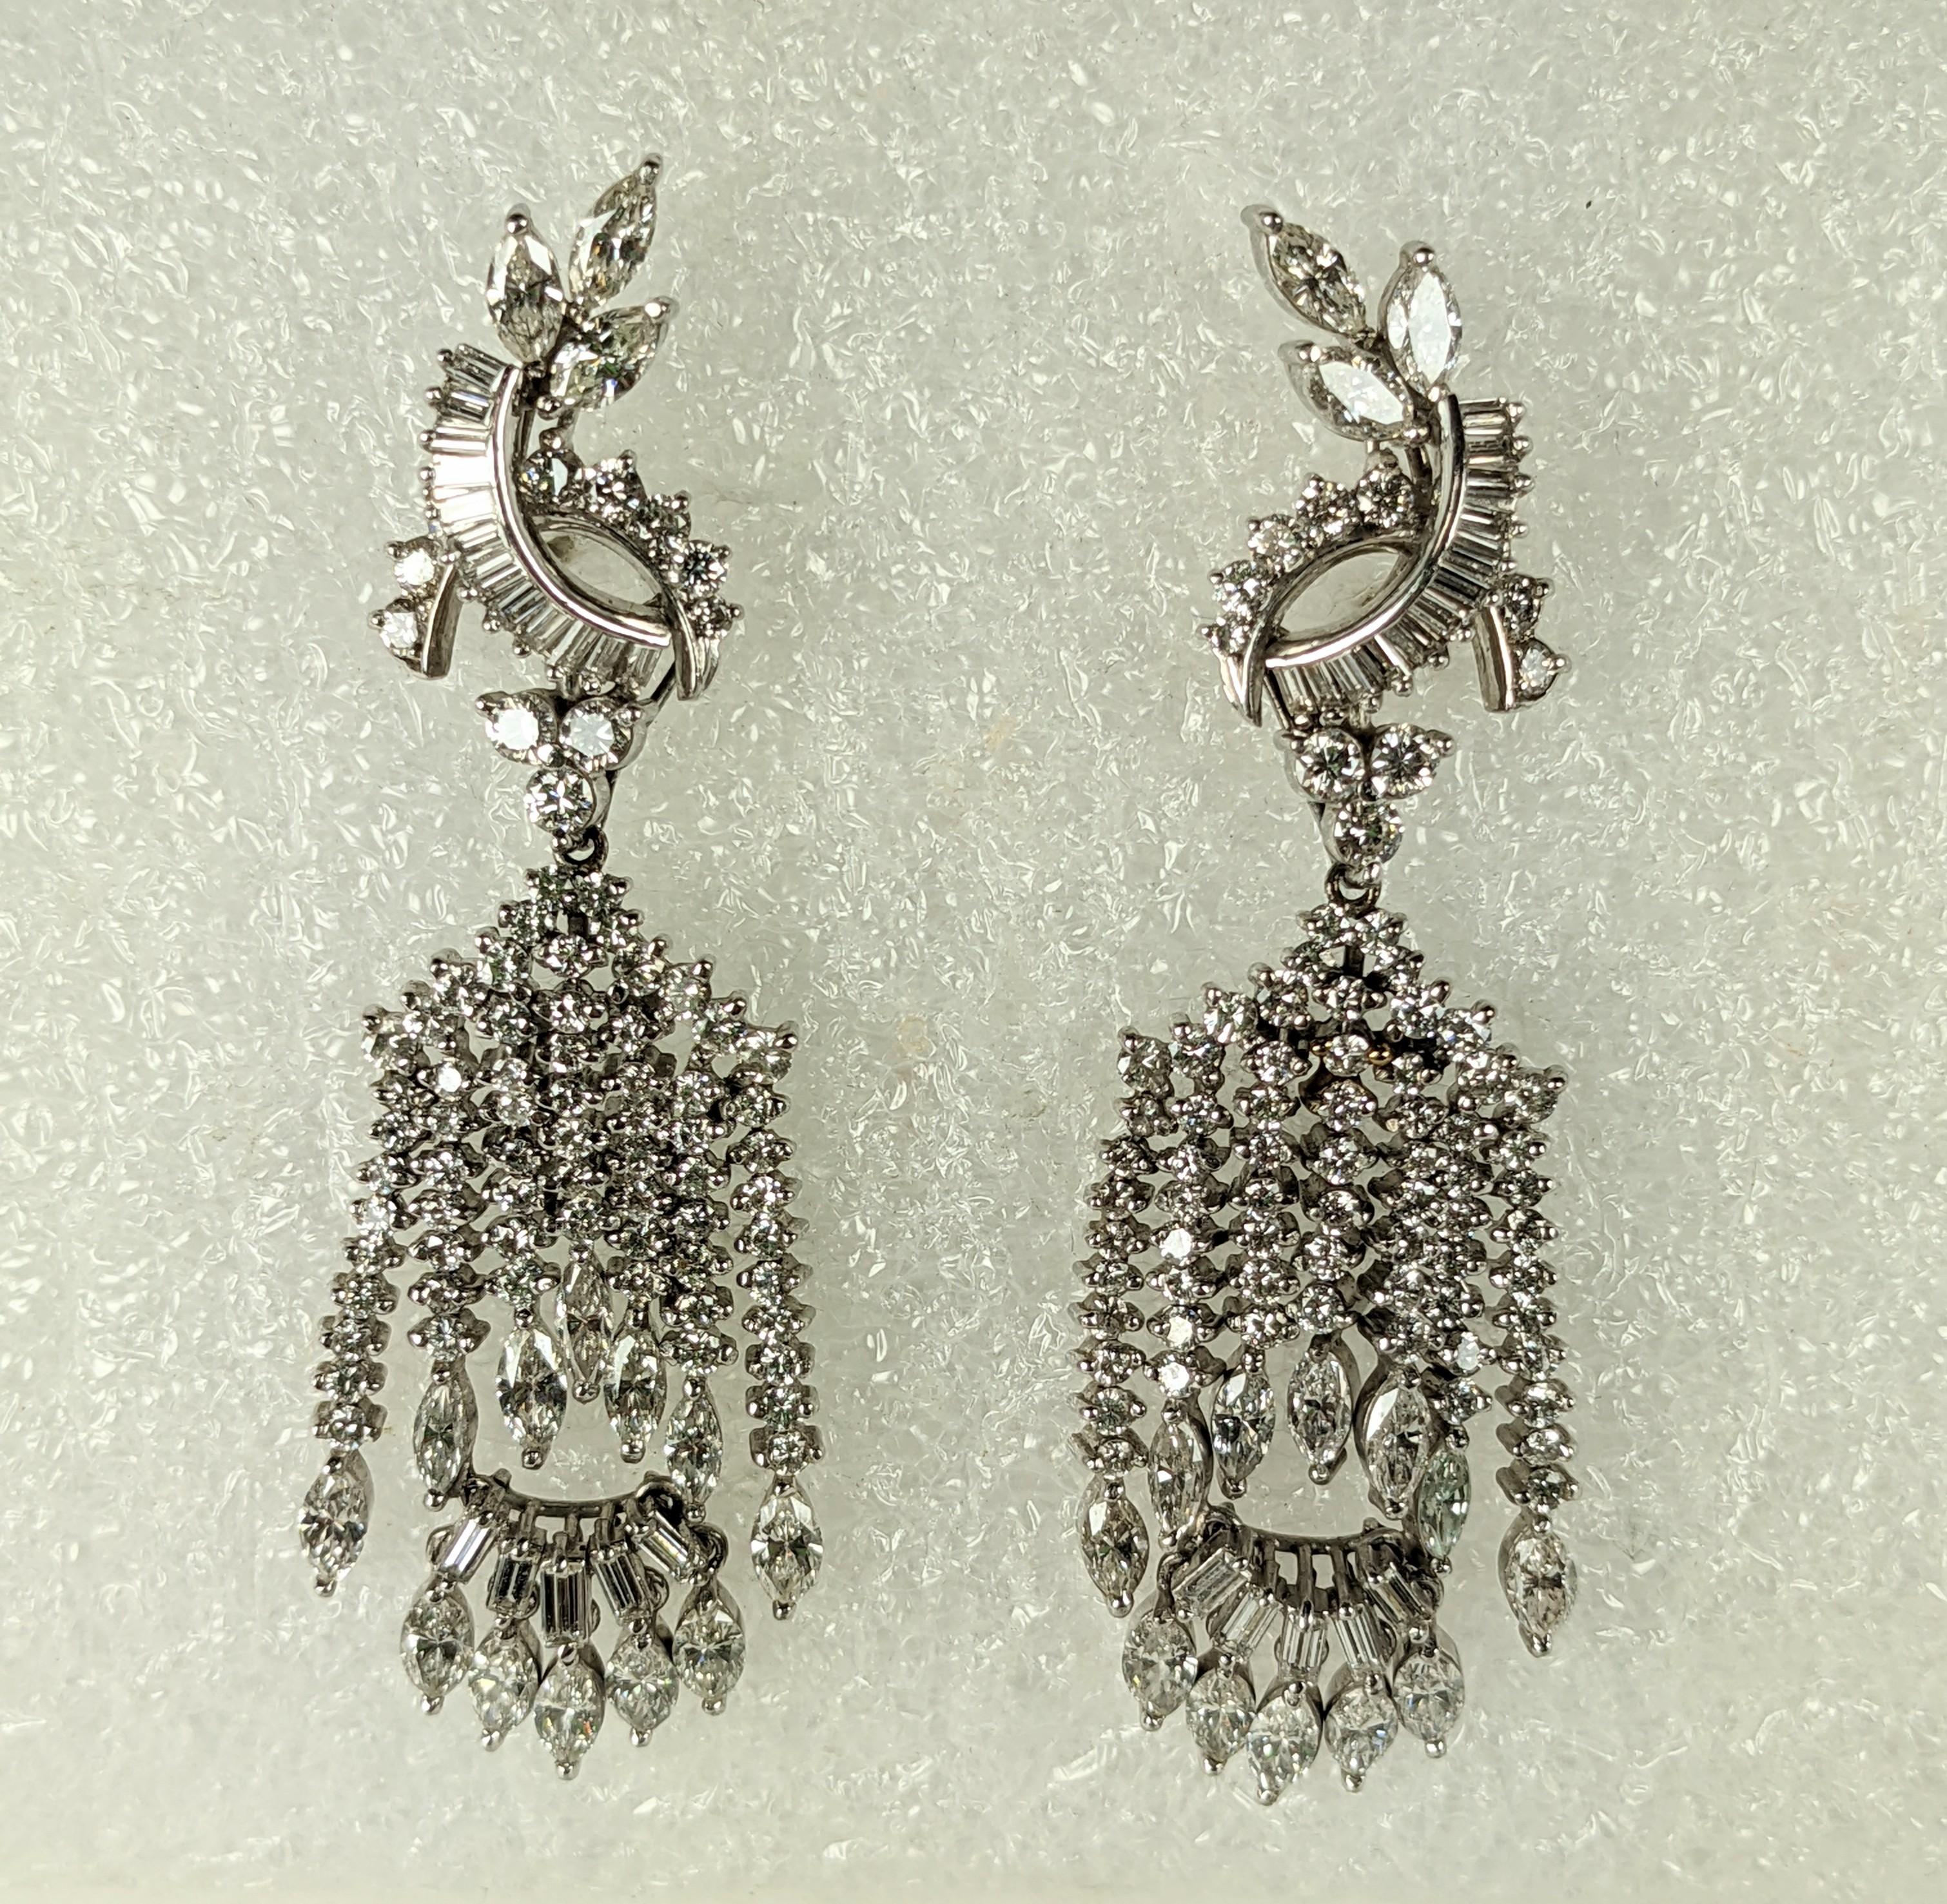 Unique Surrealist Diamond Articulated Dangling Man Earrings For Sale 4